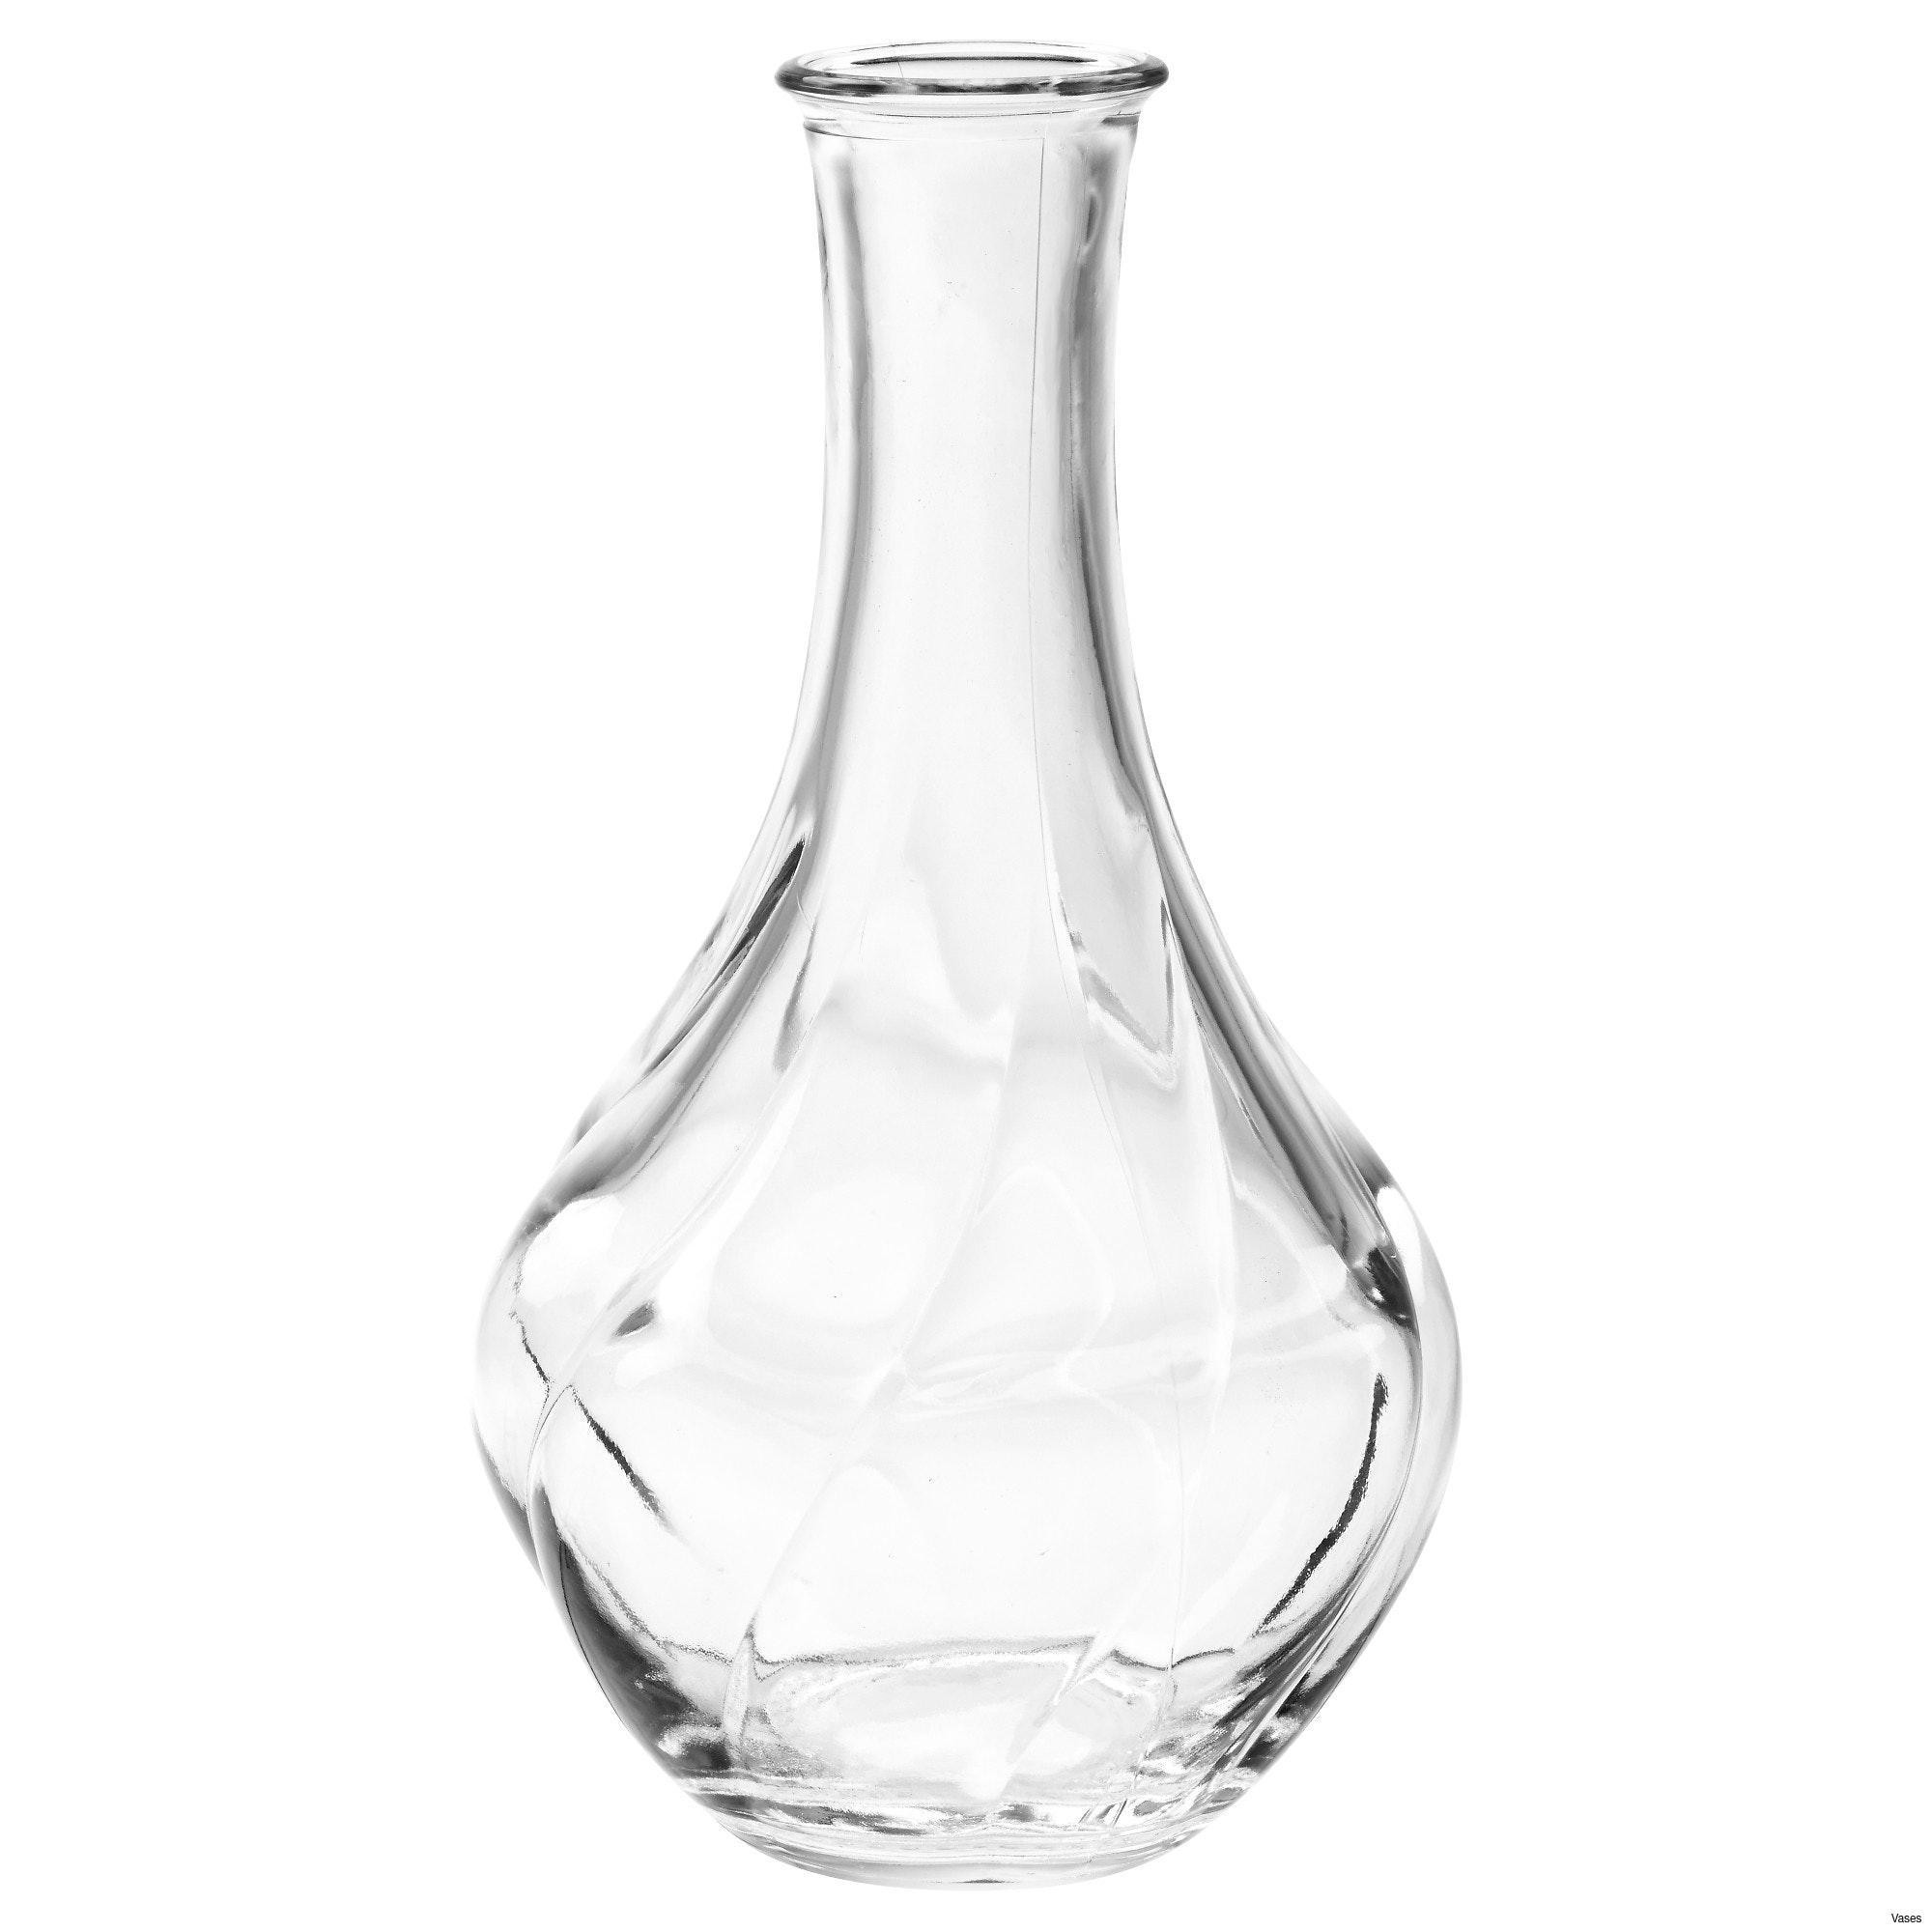 10 Nice Big Vases for Cheap 2024 free download big vases for cheap of fetching big vases for living room in living room glass vases fresh pertaining to fetching big vases for living room in living room glass vases fresh clear vase 0d tag